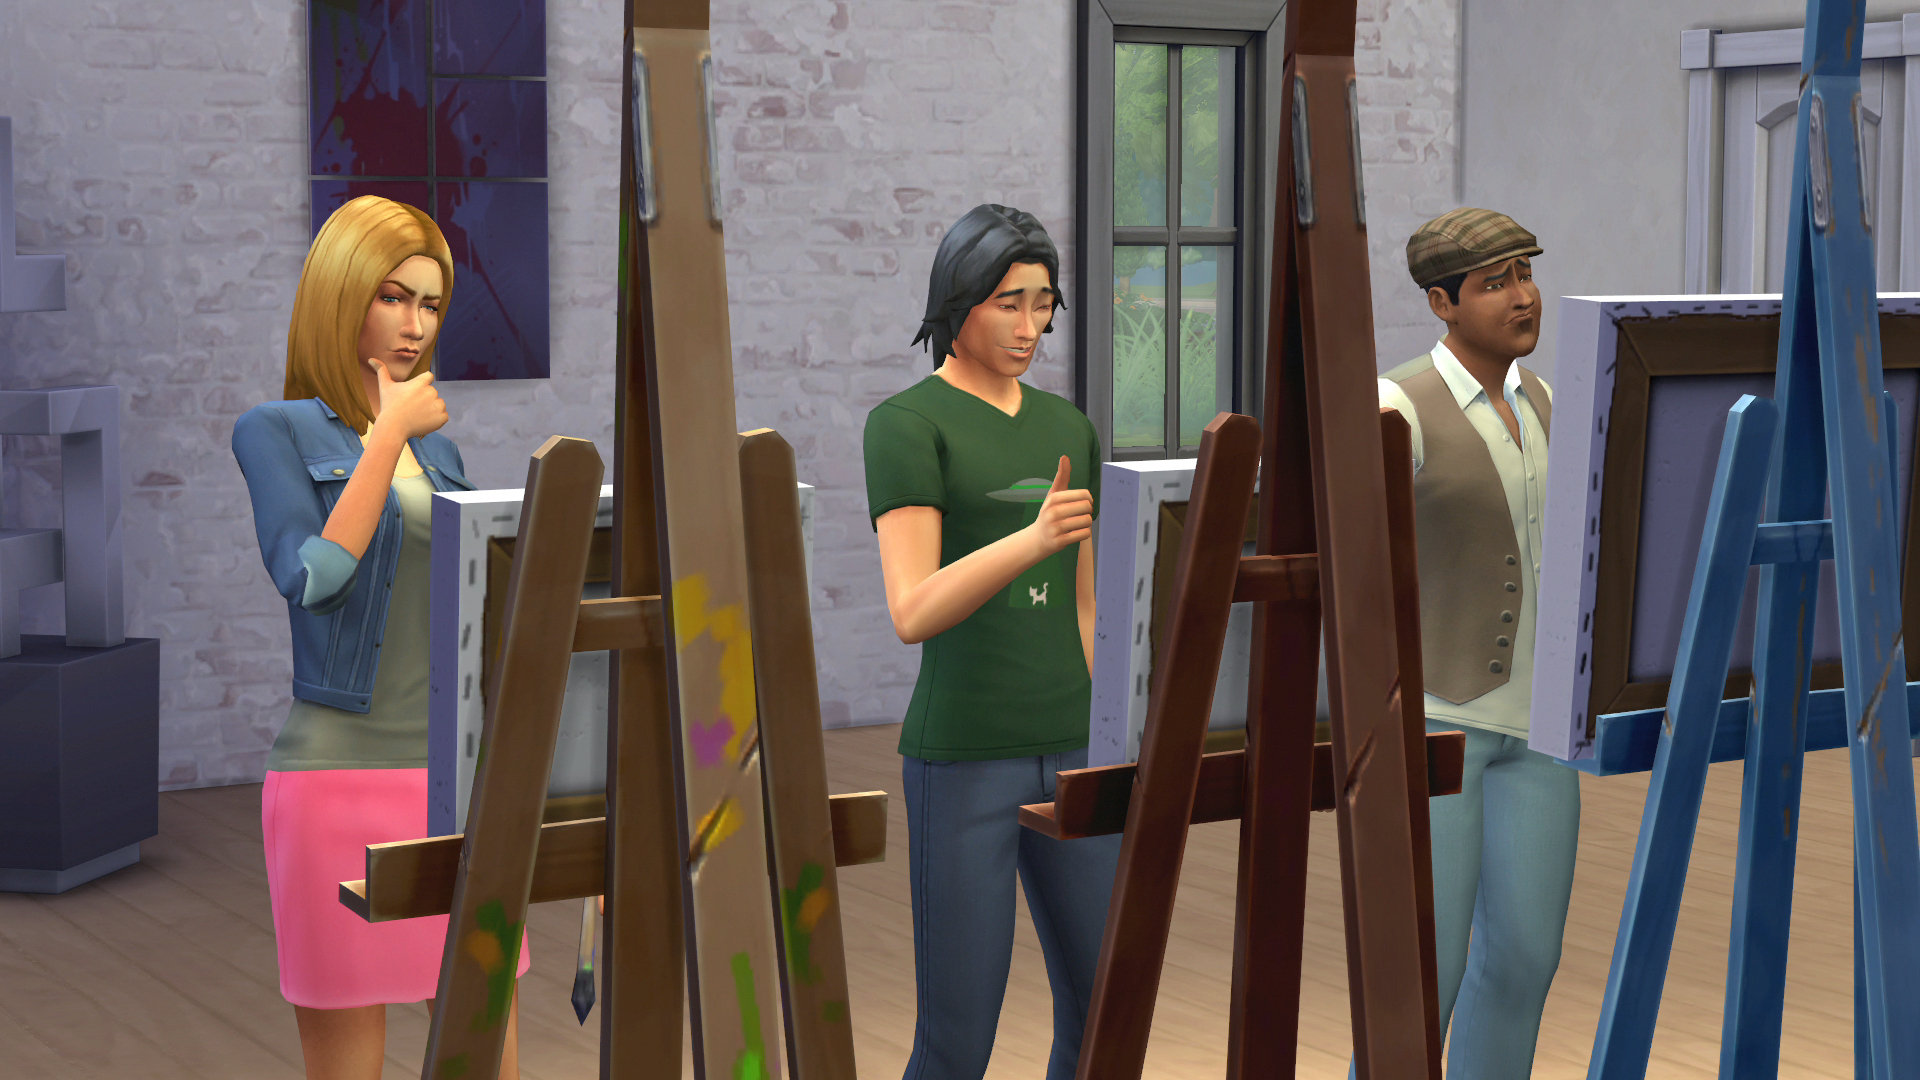 Sims 4 Cheats on PS4: How To Get More Money – GameSpew